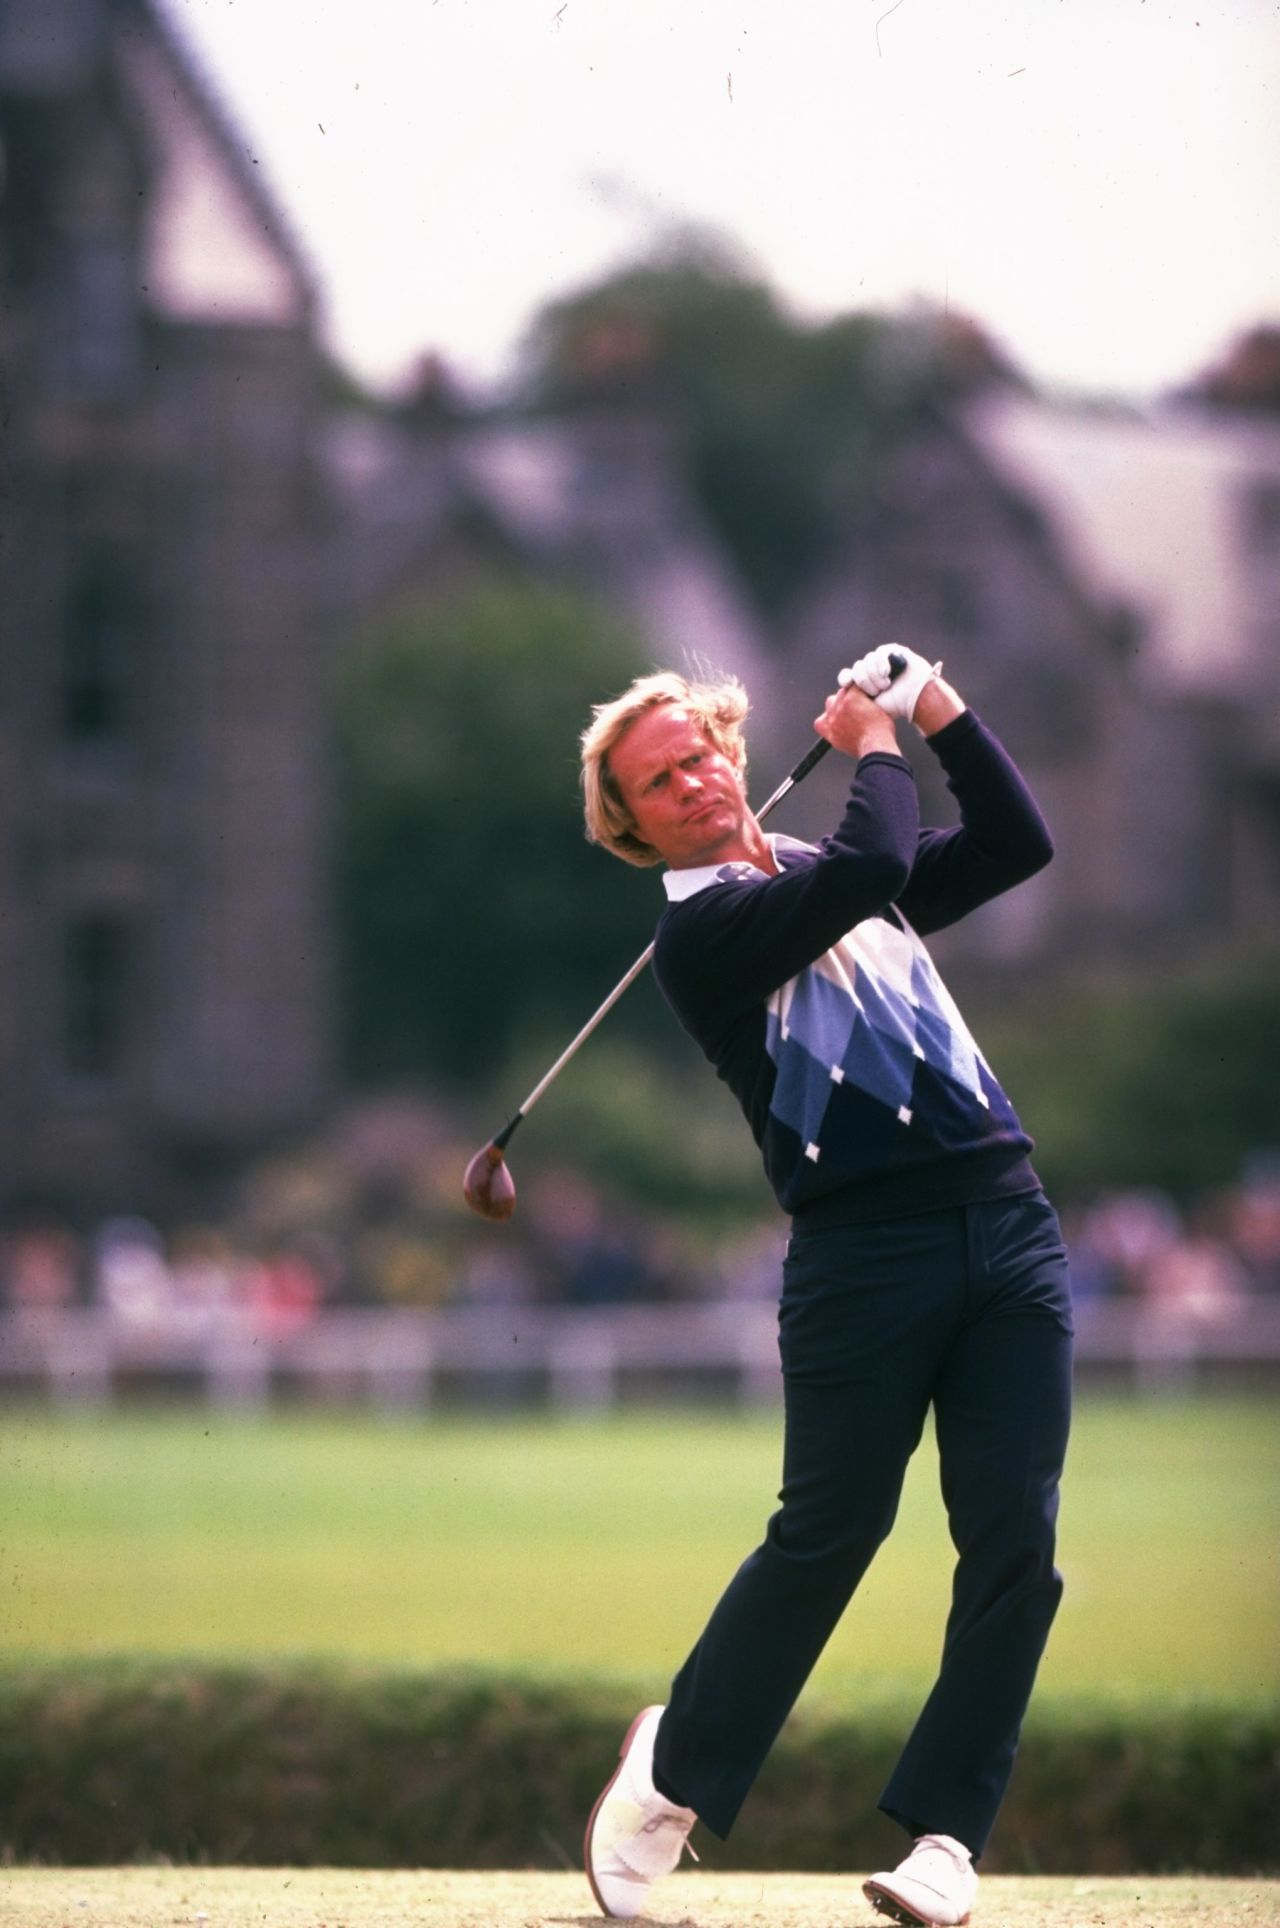 Nicklaus won his third British Open title in 1978 -- his second triumph at the home of golf, St. Andrews.